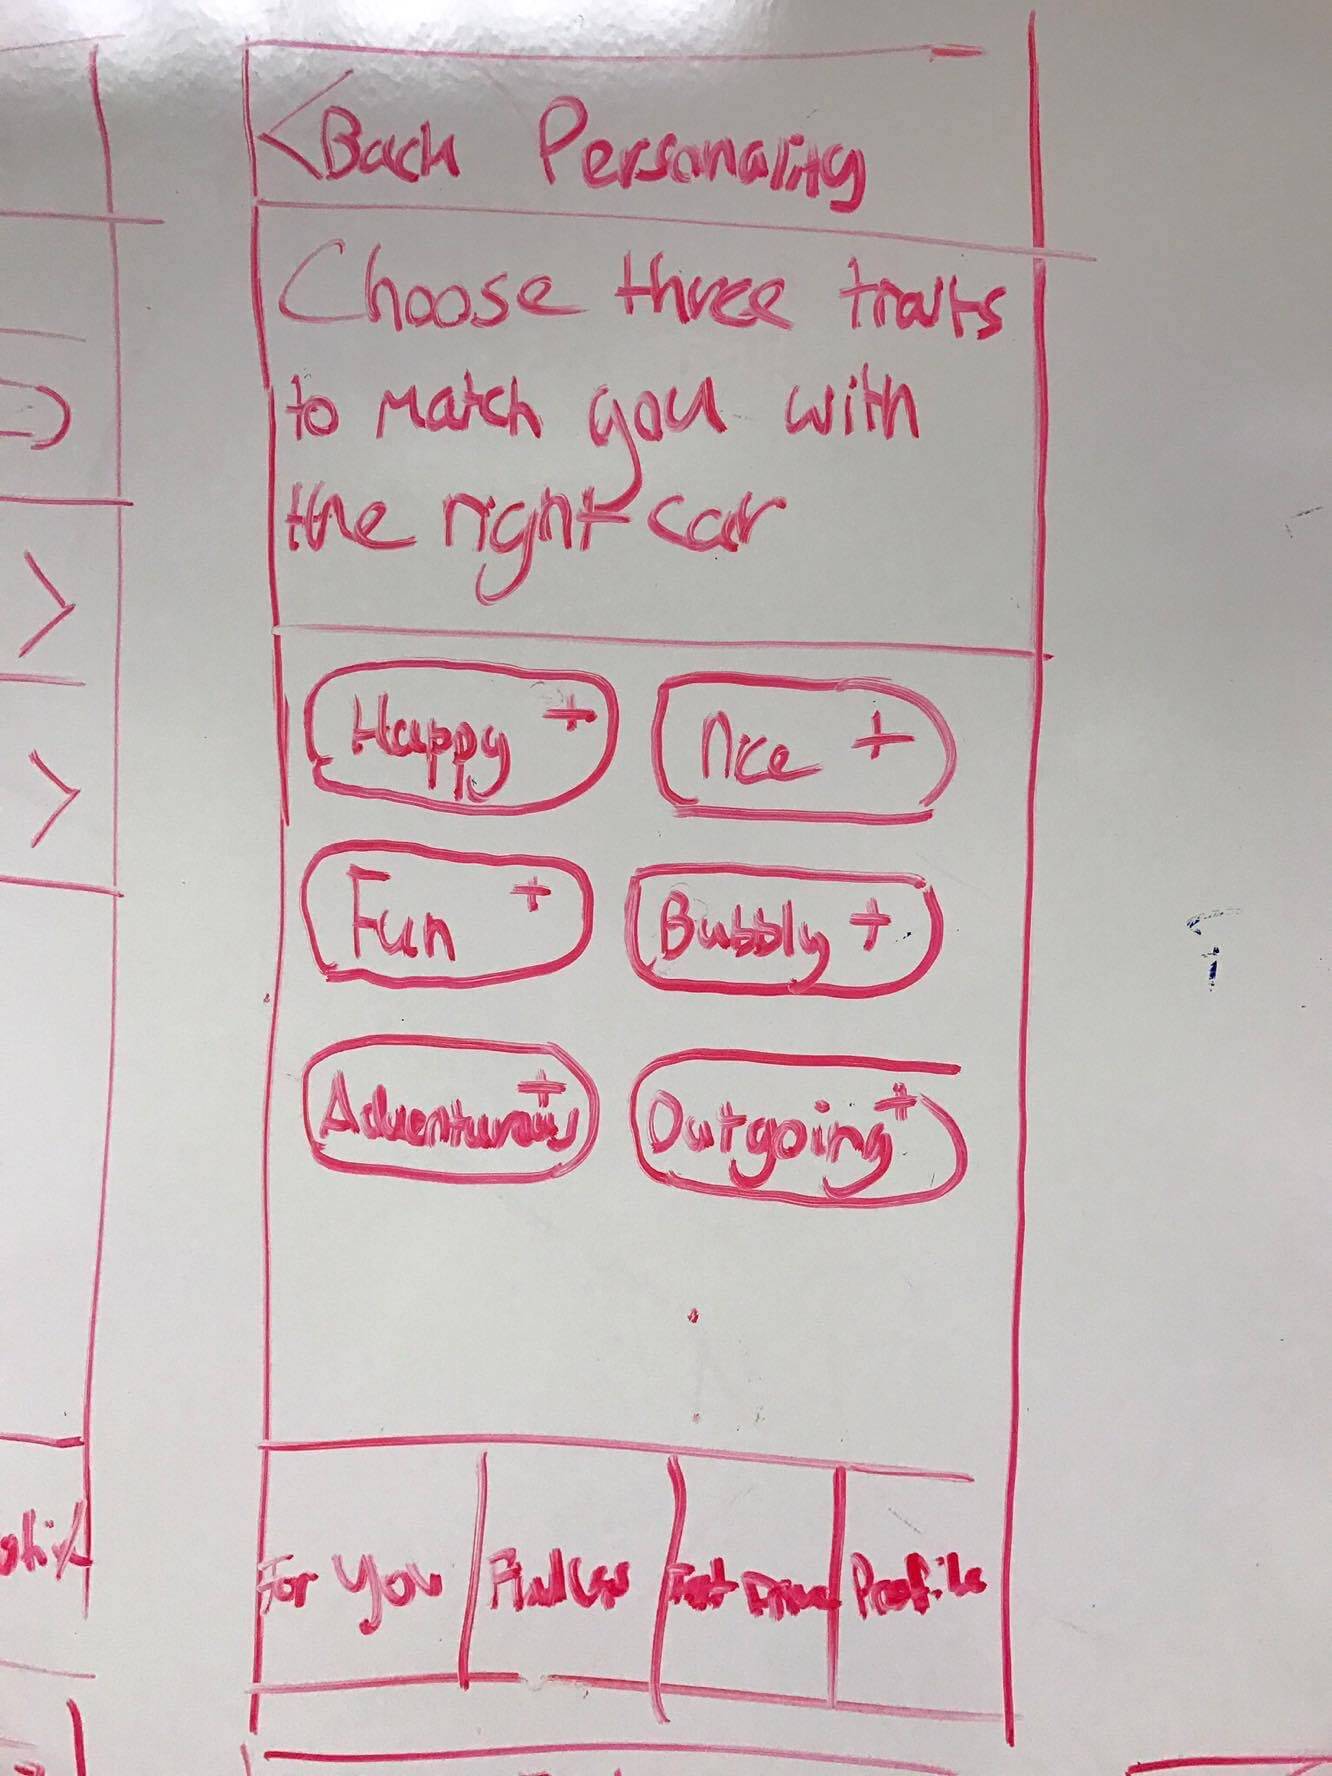 A whiteboard showing how users can inform the app about their personality